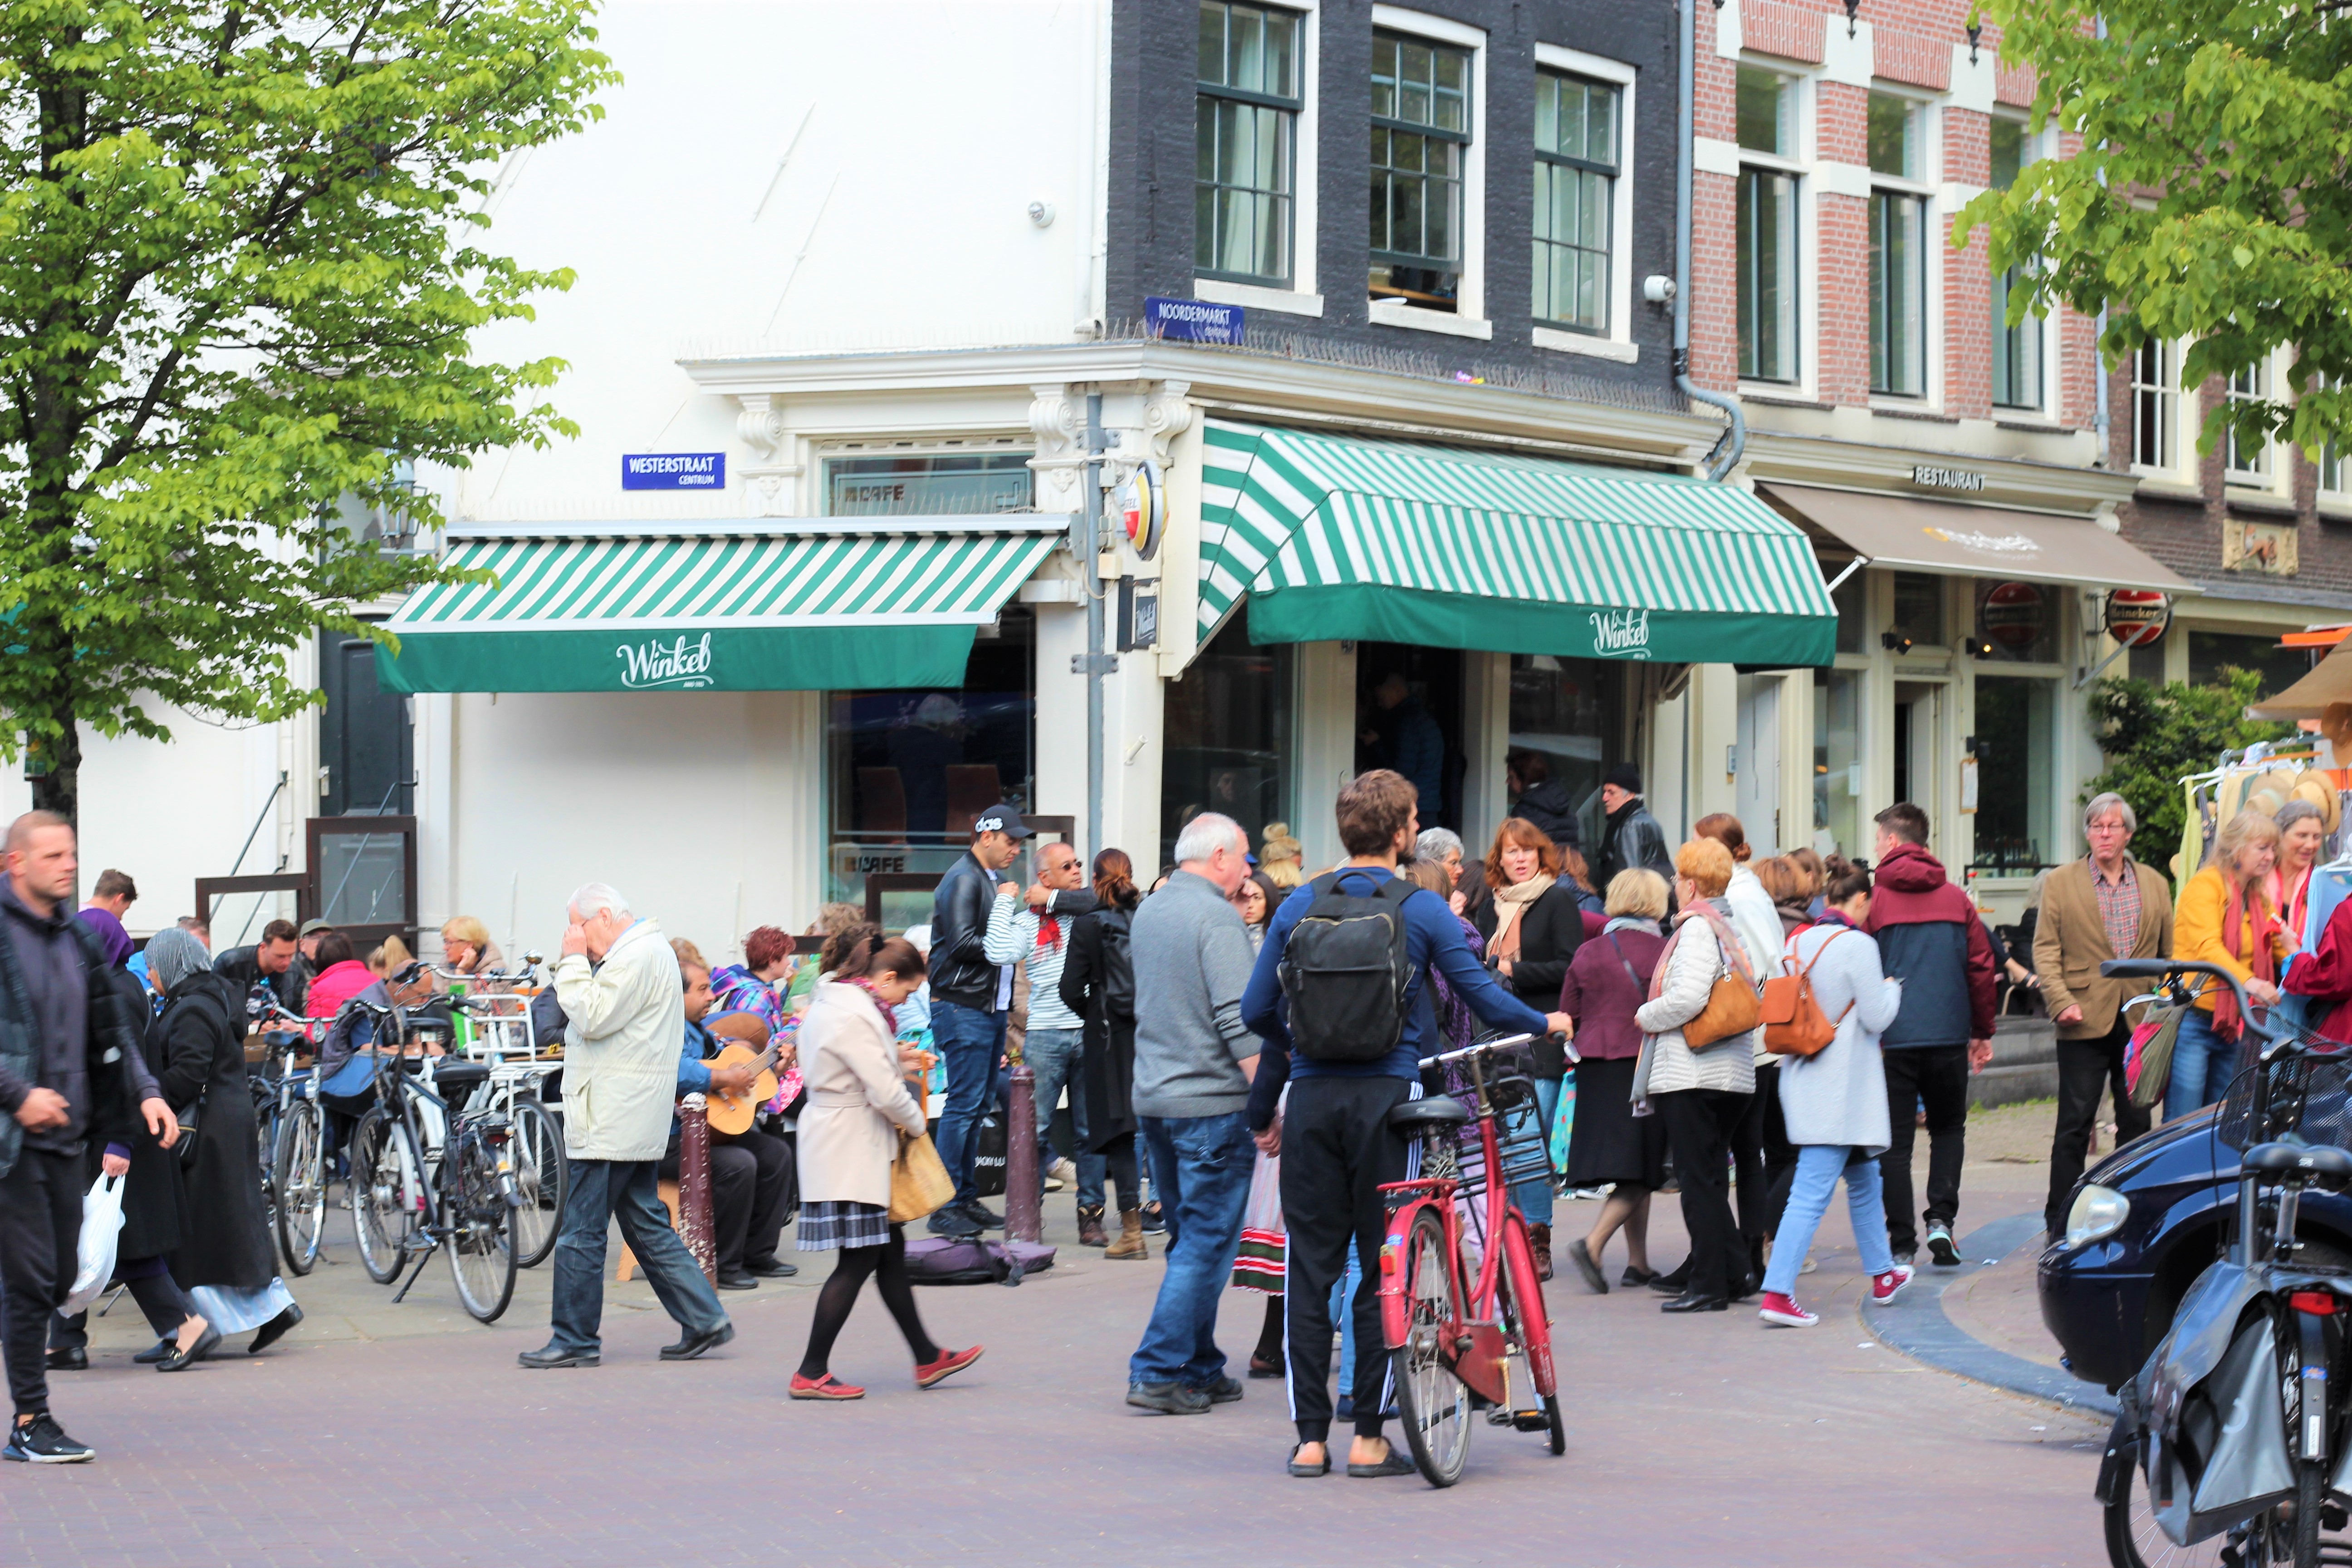 The Travelettes guide to Jordaan, Amsterdam